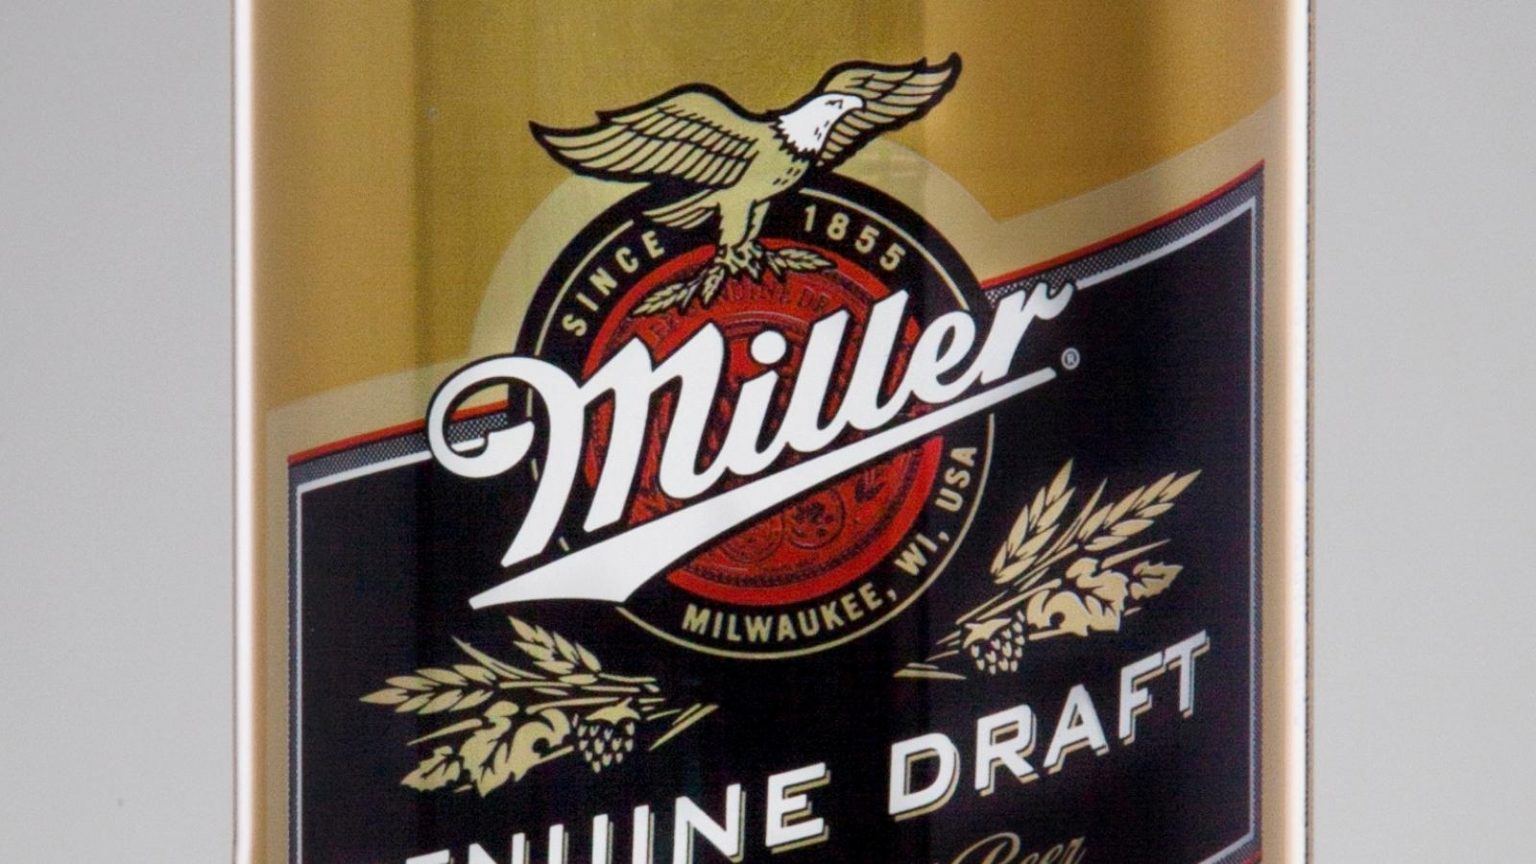 Miller 64 Review